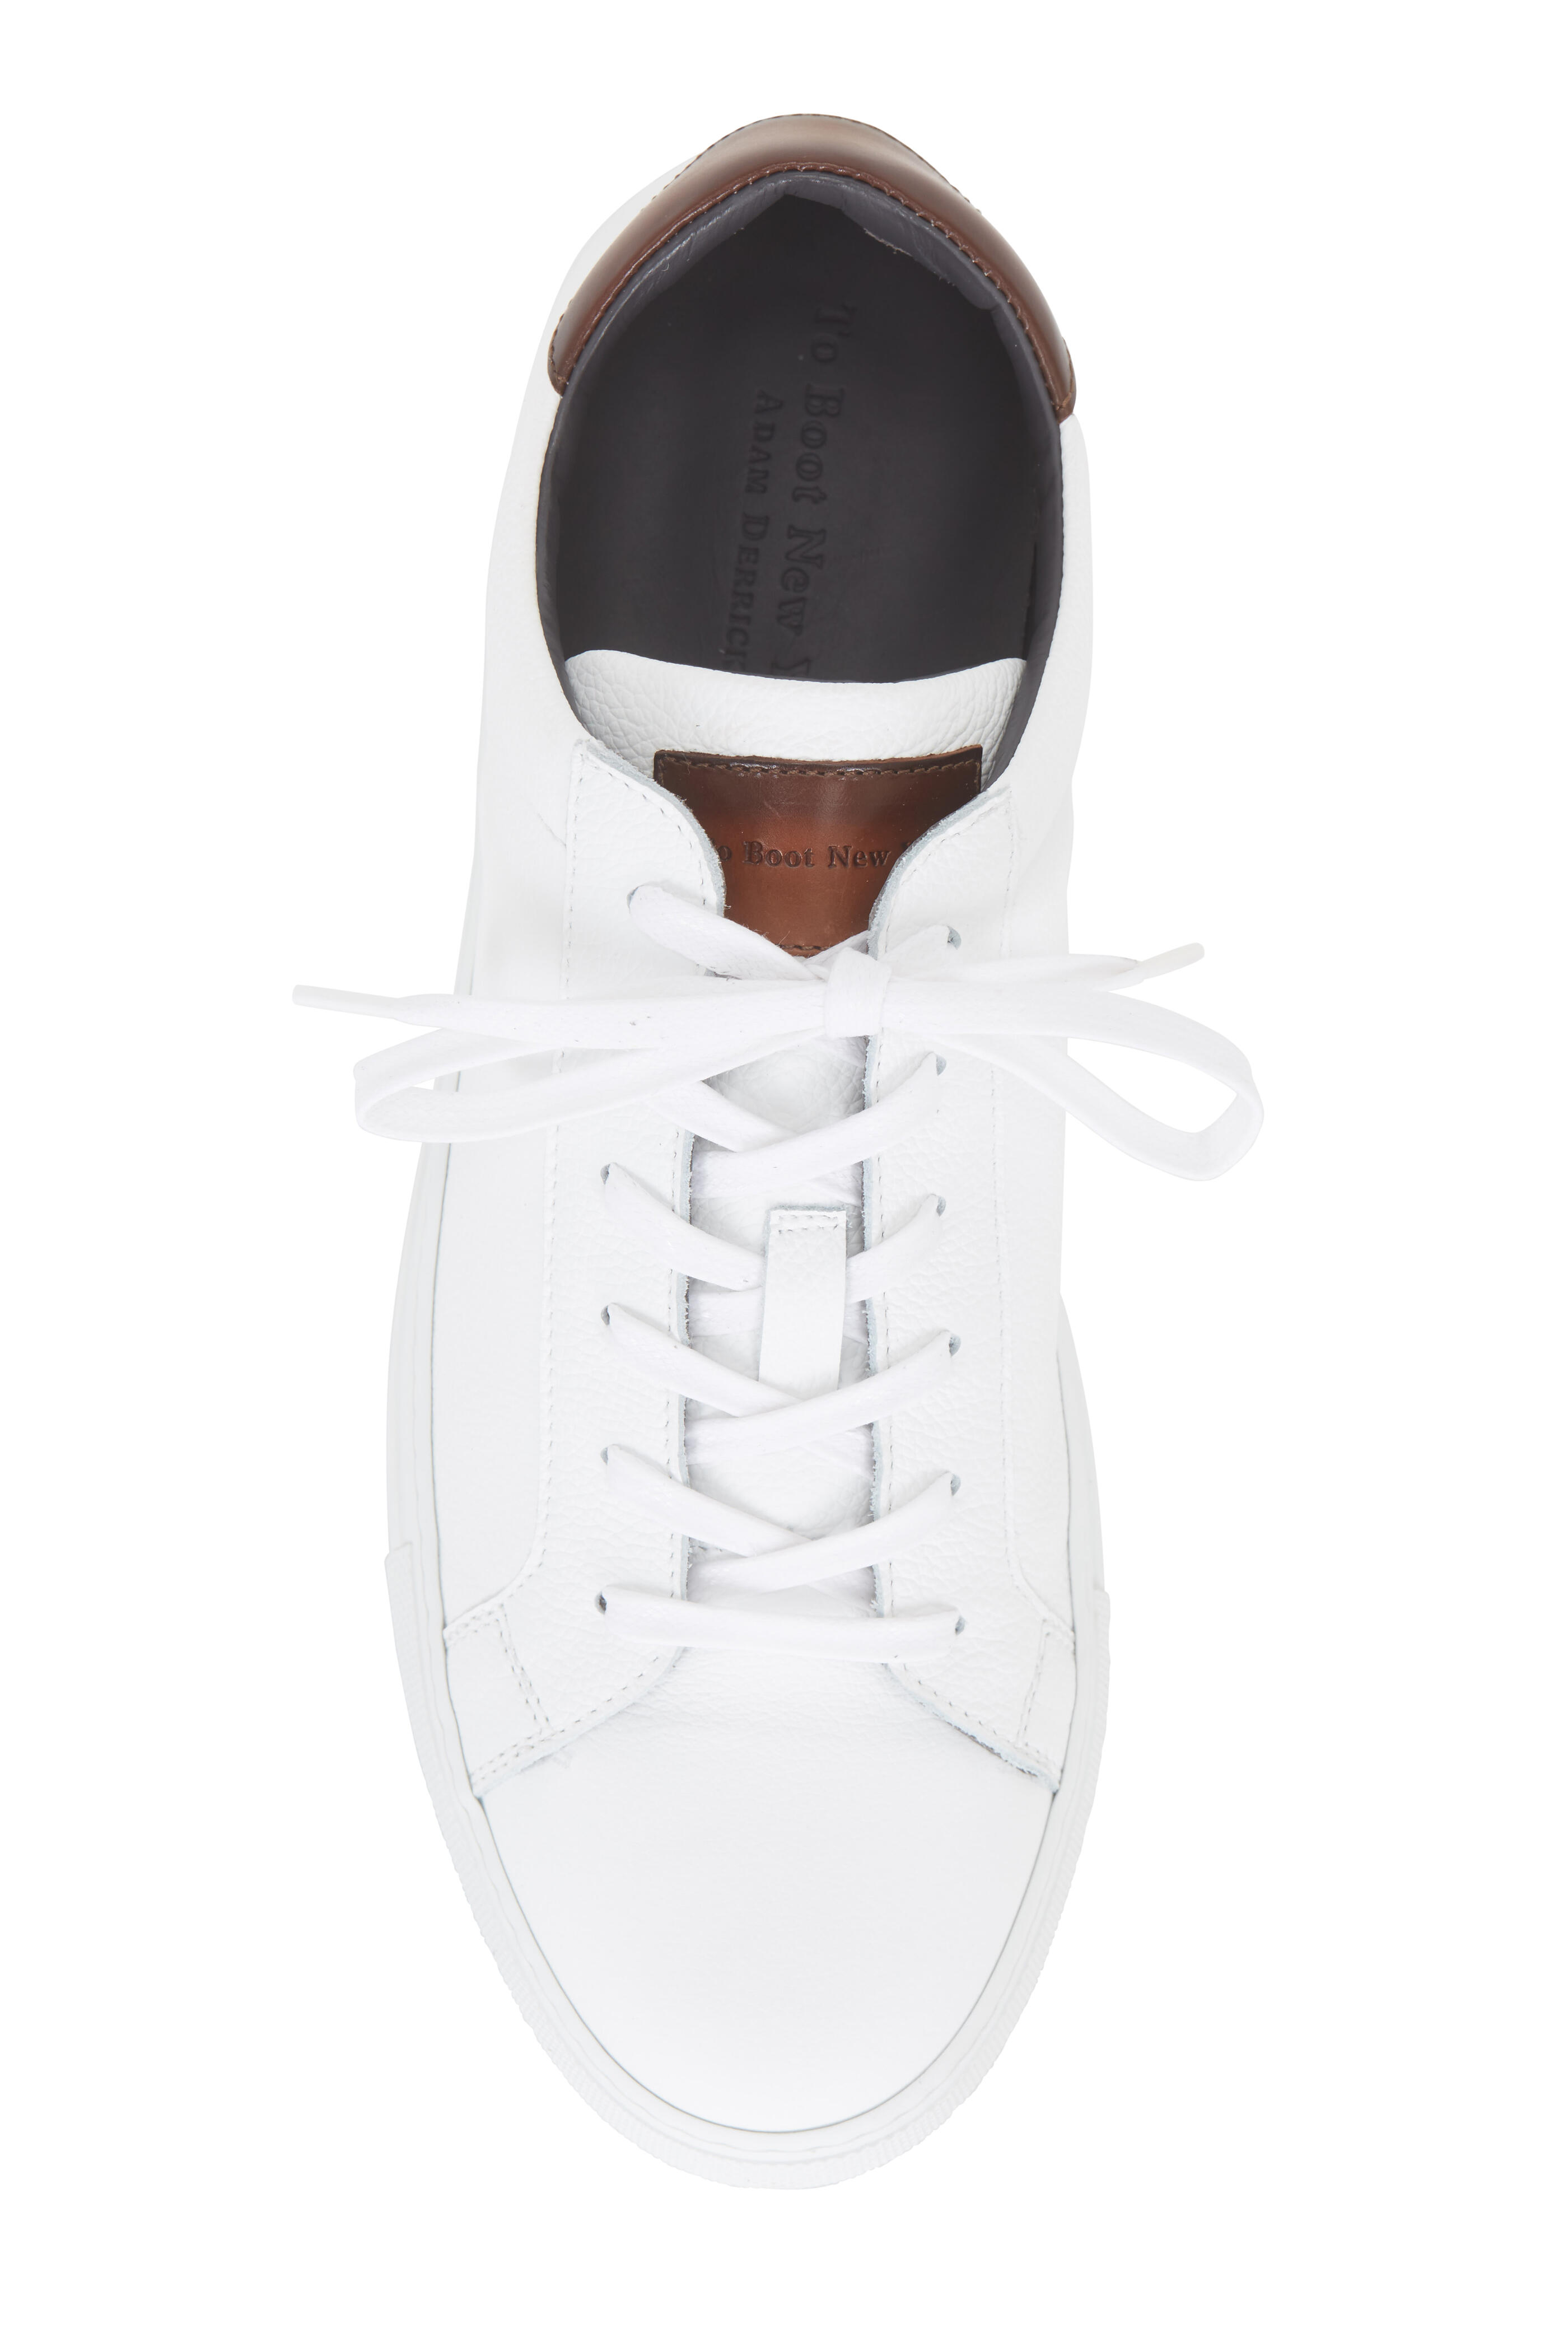 To Boot New York - Knox White Leather Sneaker | Mitchell Stores